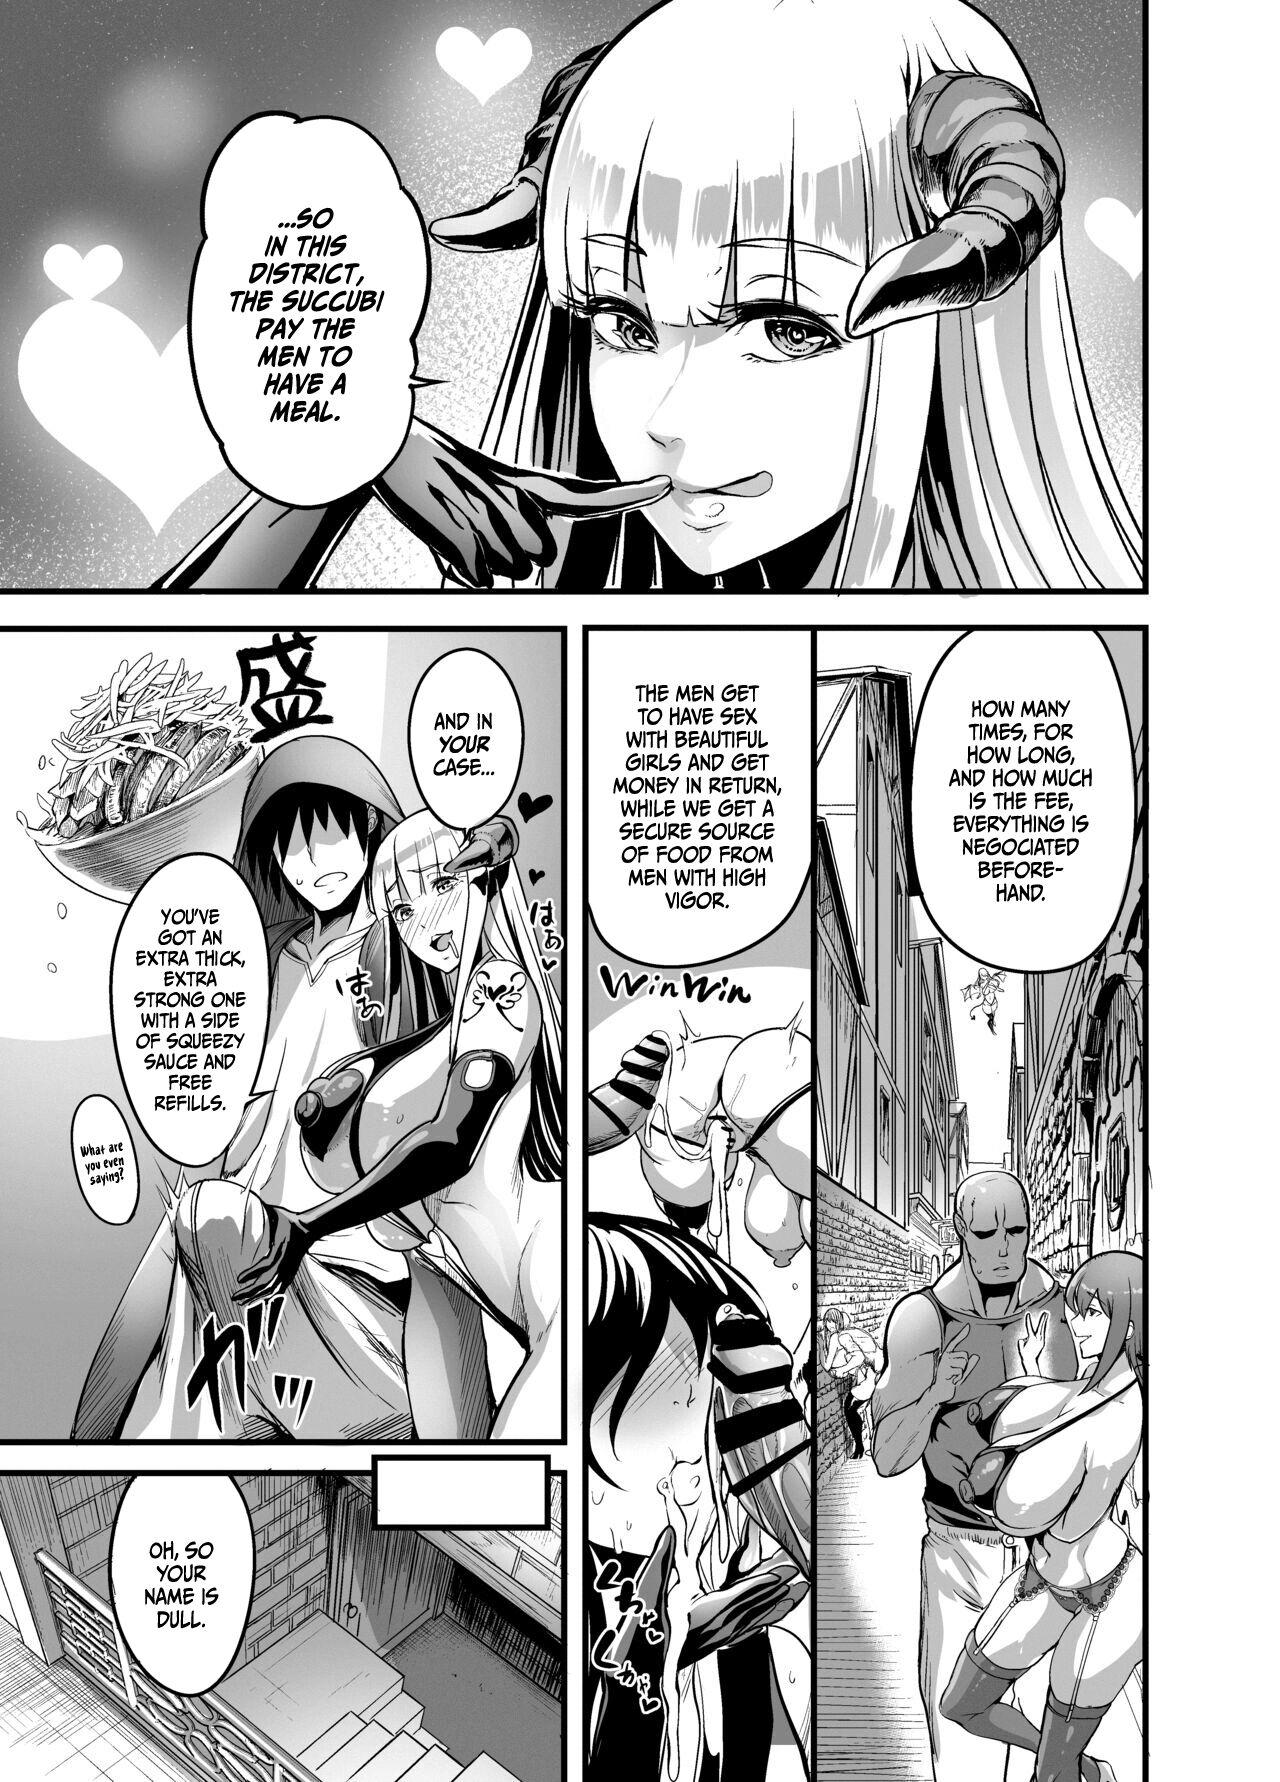 Housewife Welcome to Succubus District! - Original Best Blowjobs Ever - Page 7